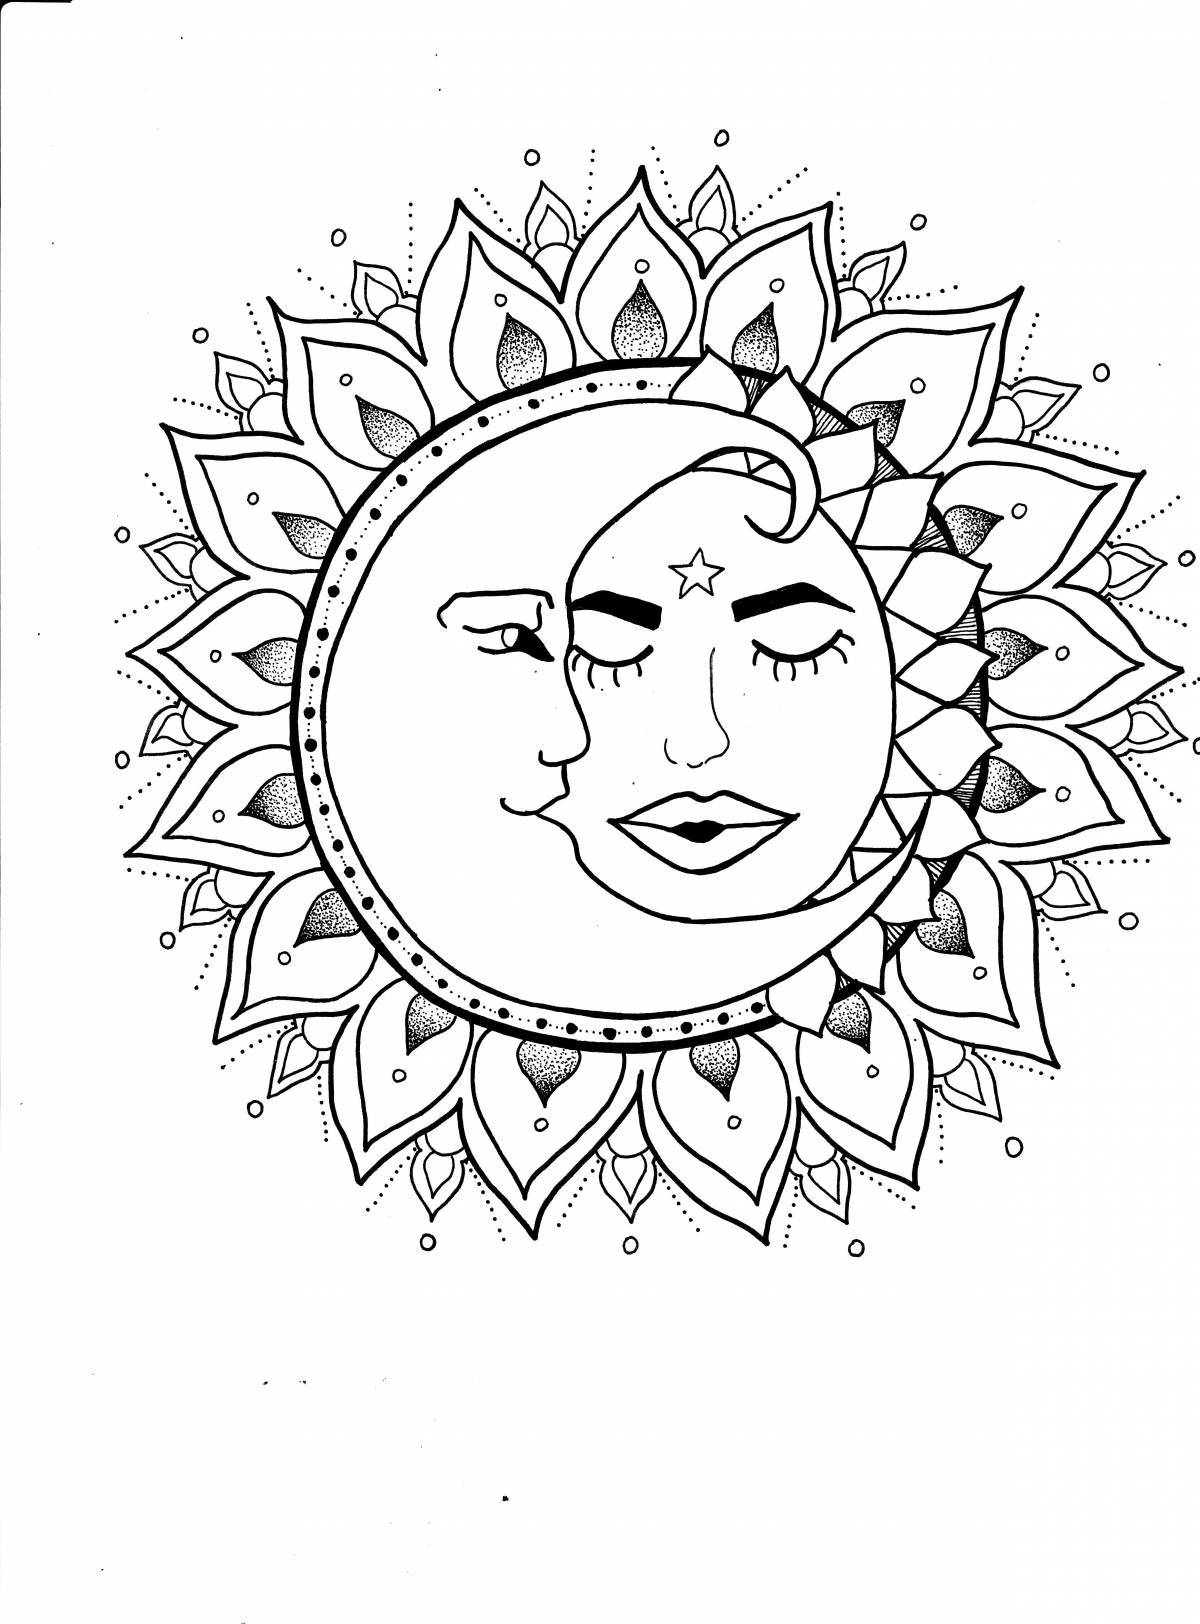 Glorious sun and moon coloring page